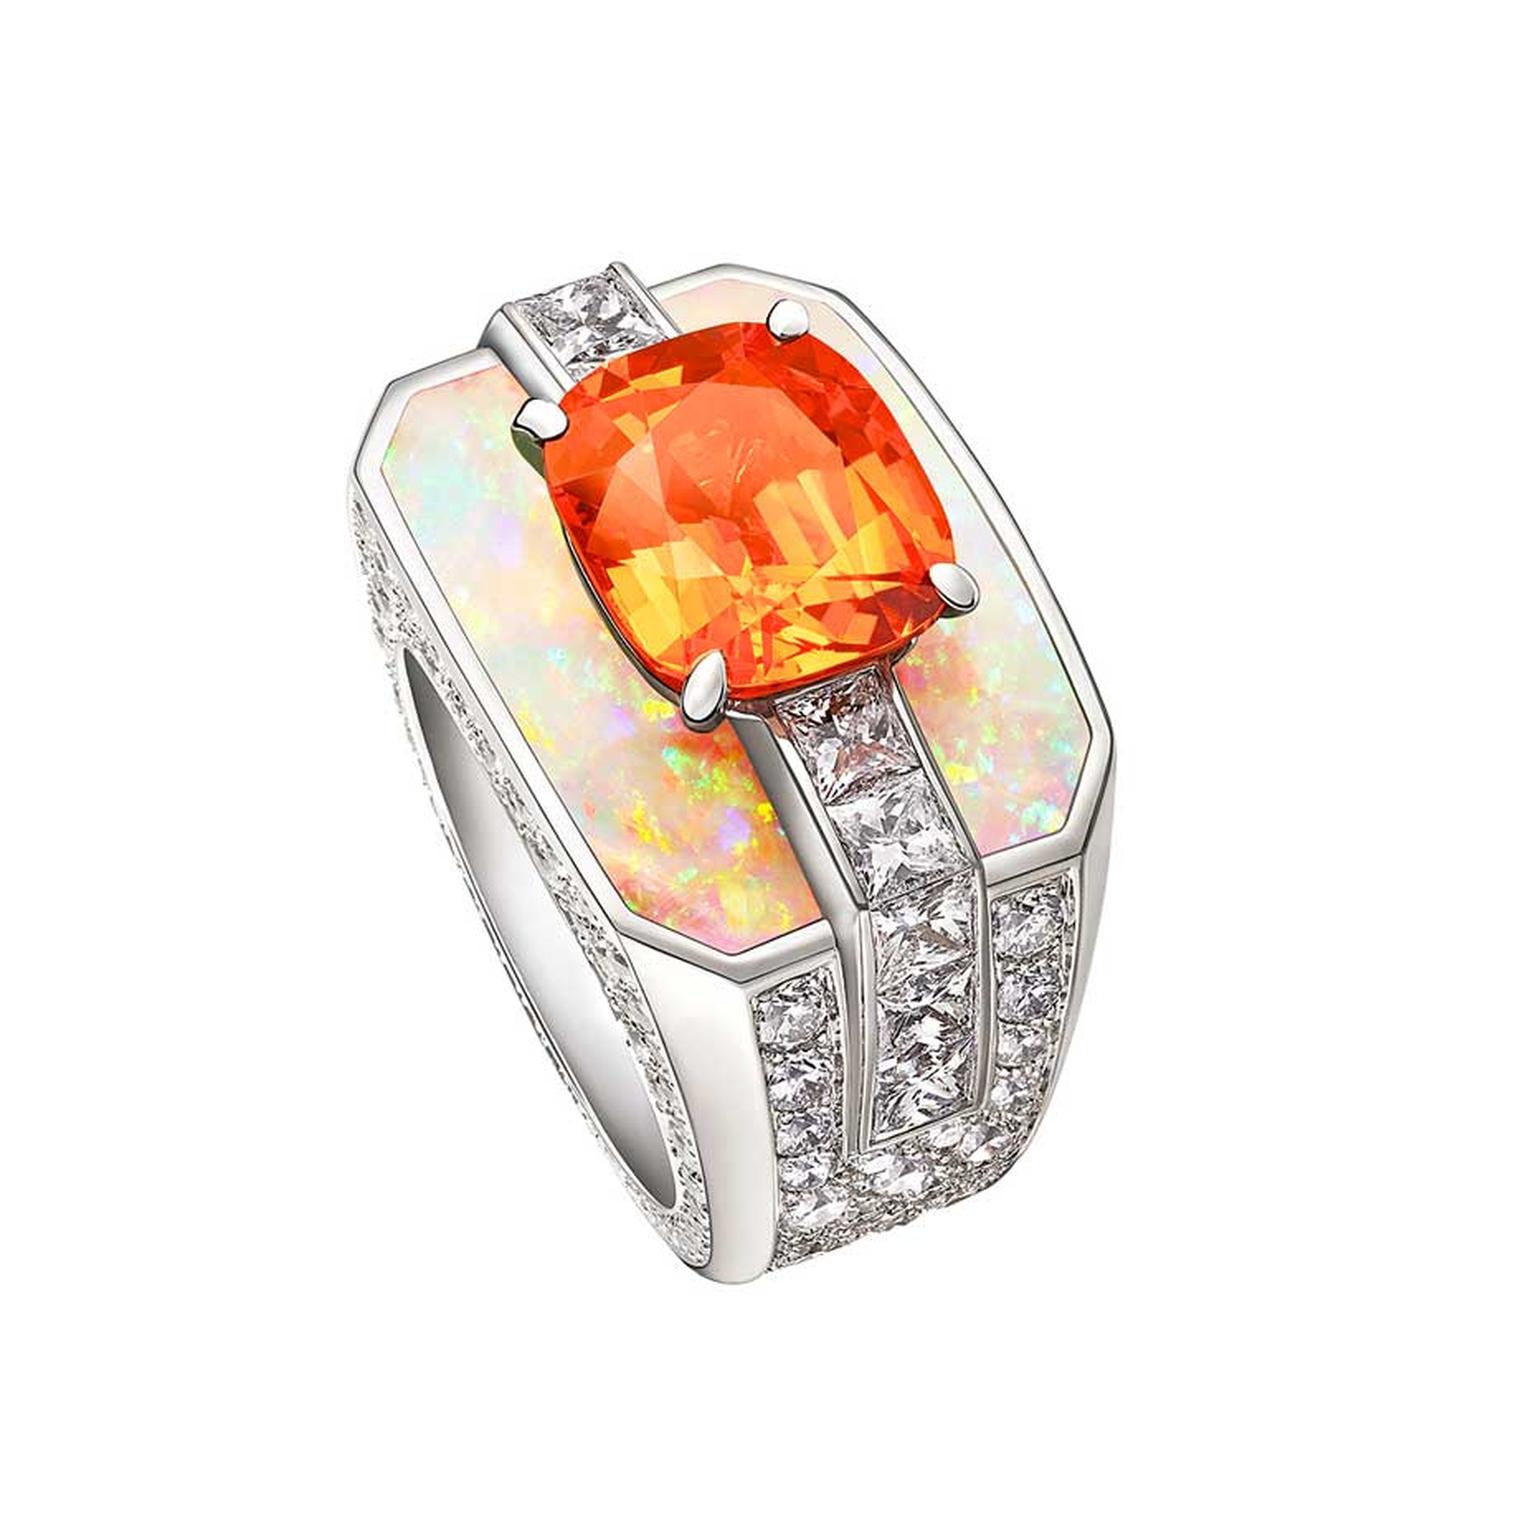 Louis Vuitton LV Reflect Crystal Ring